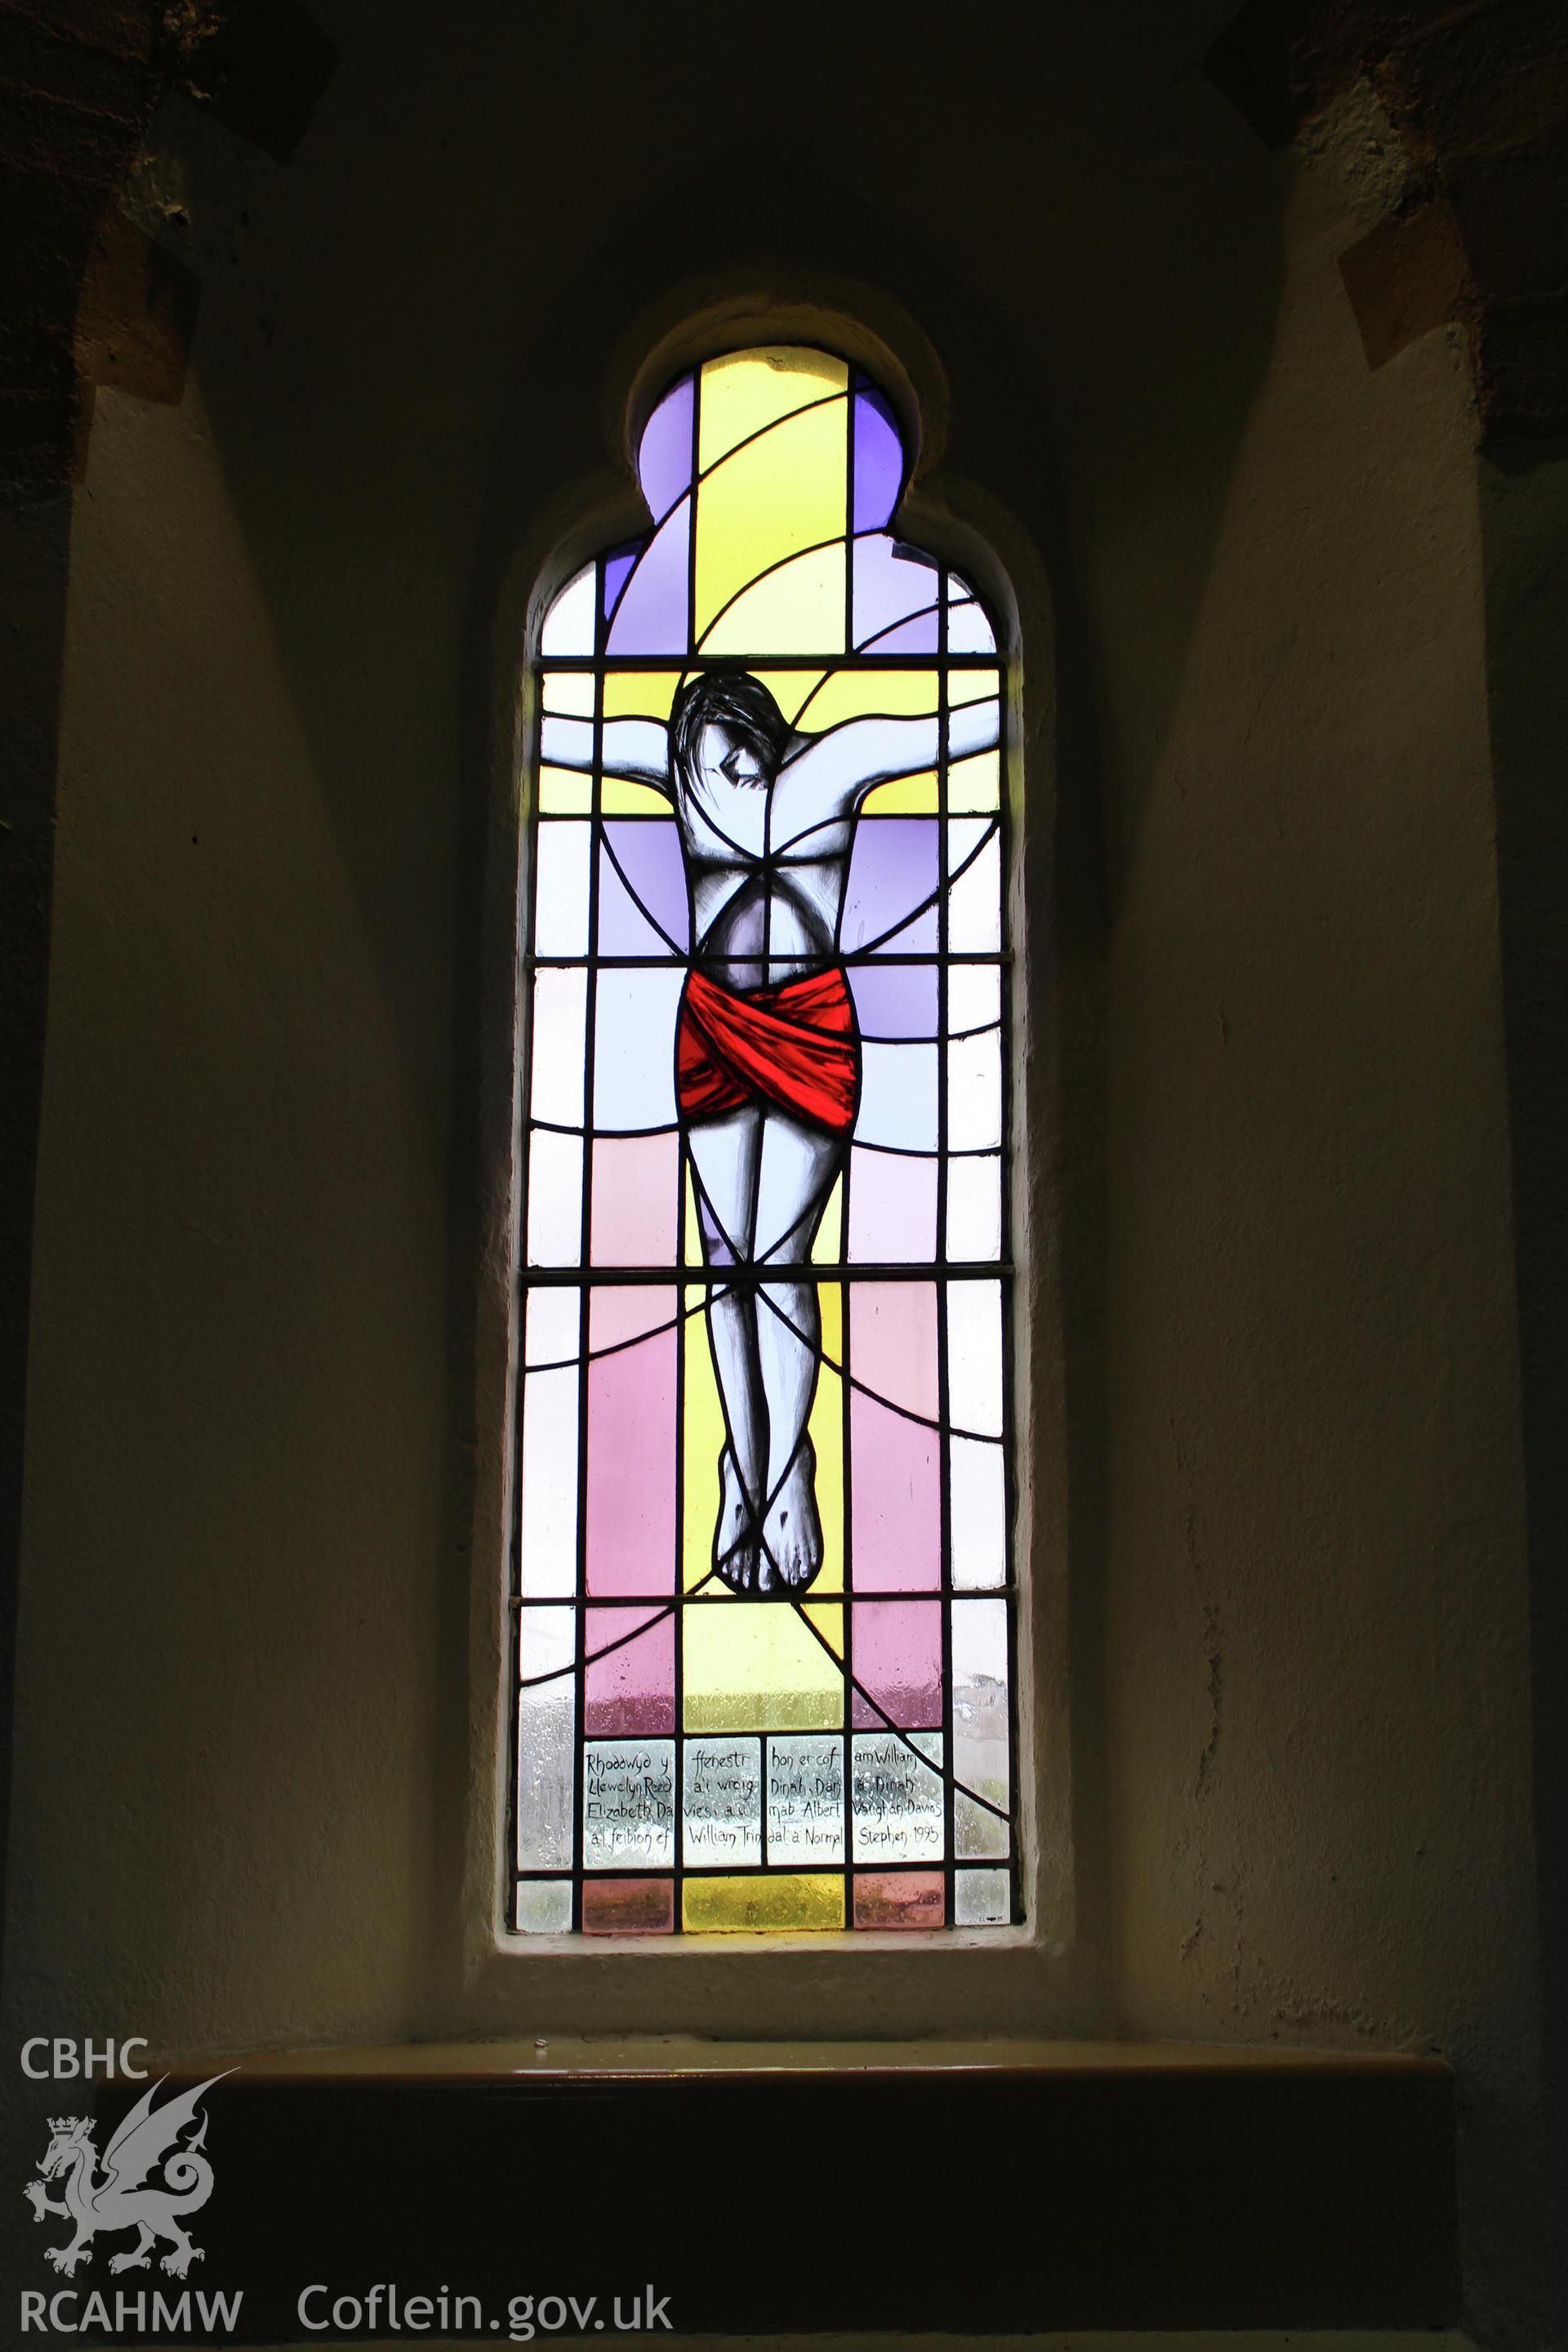 Detail of window: The Crucifixion by caroline Loveys 1995-96